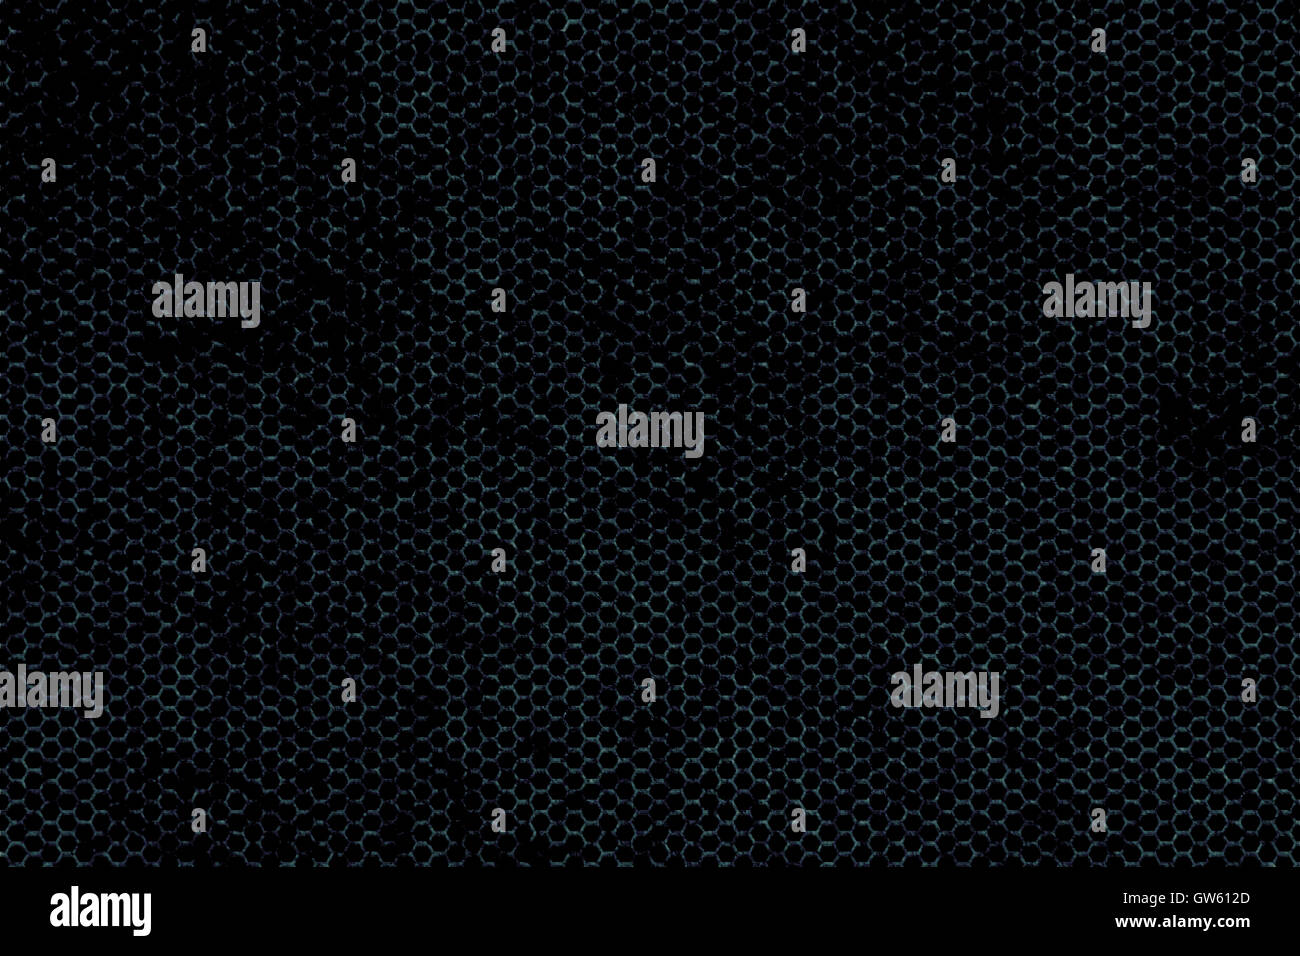 black, silver and rust metallic mesh background texture. Stock Photo